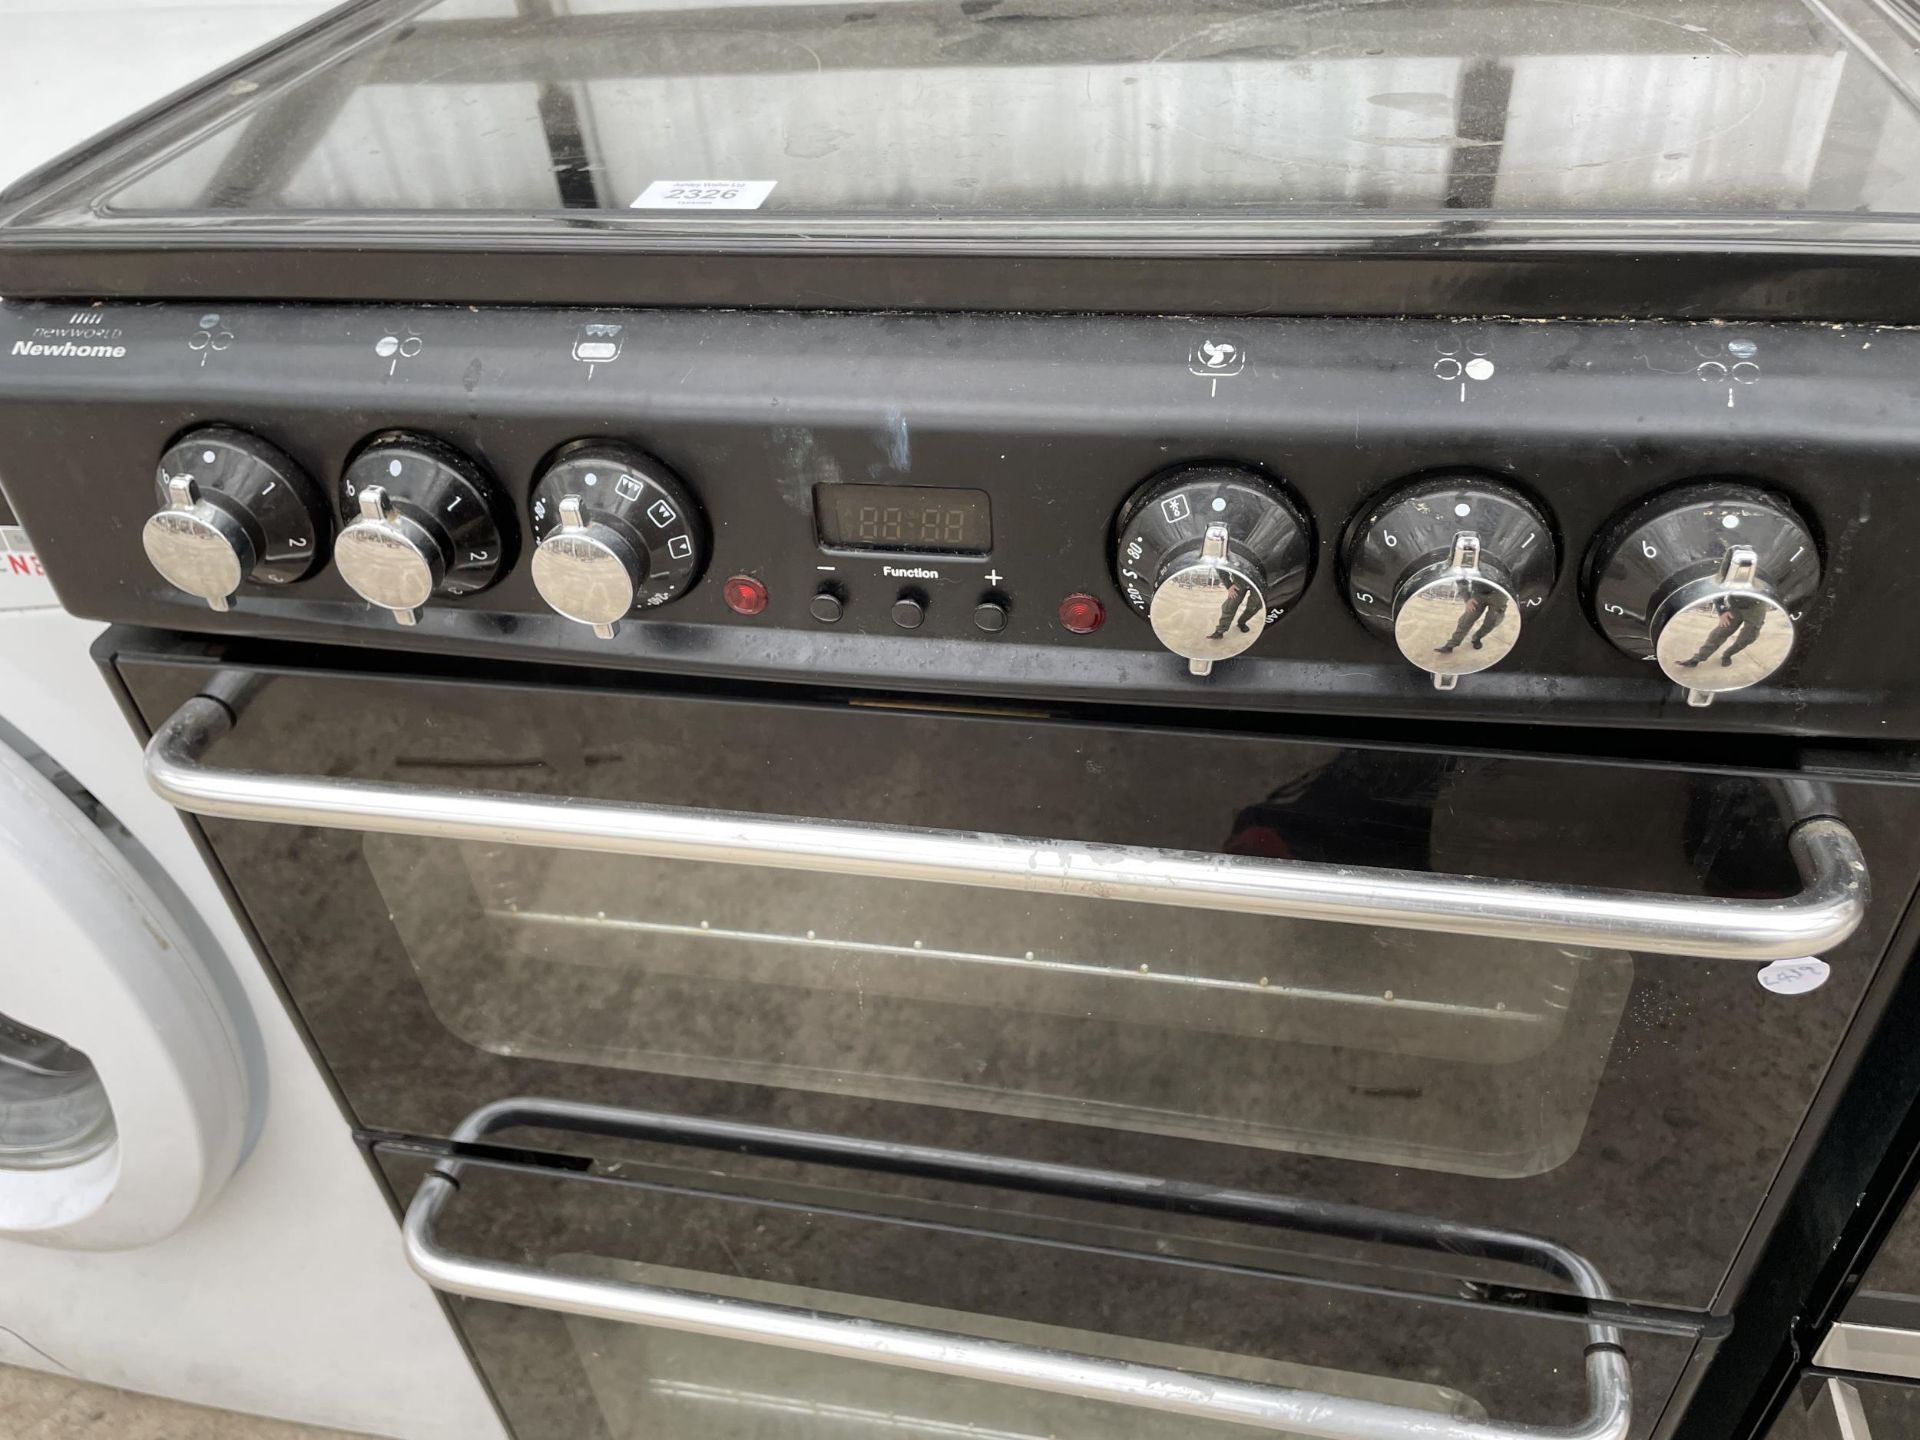 A BLACK NEW WORLD ELECTRIC OVEN AND HOB - Image 4 of 5